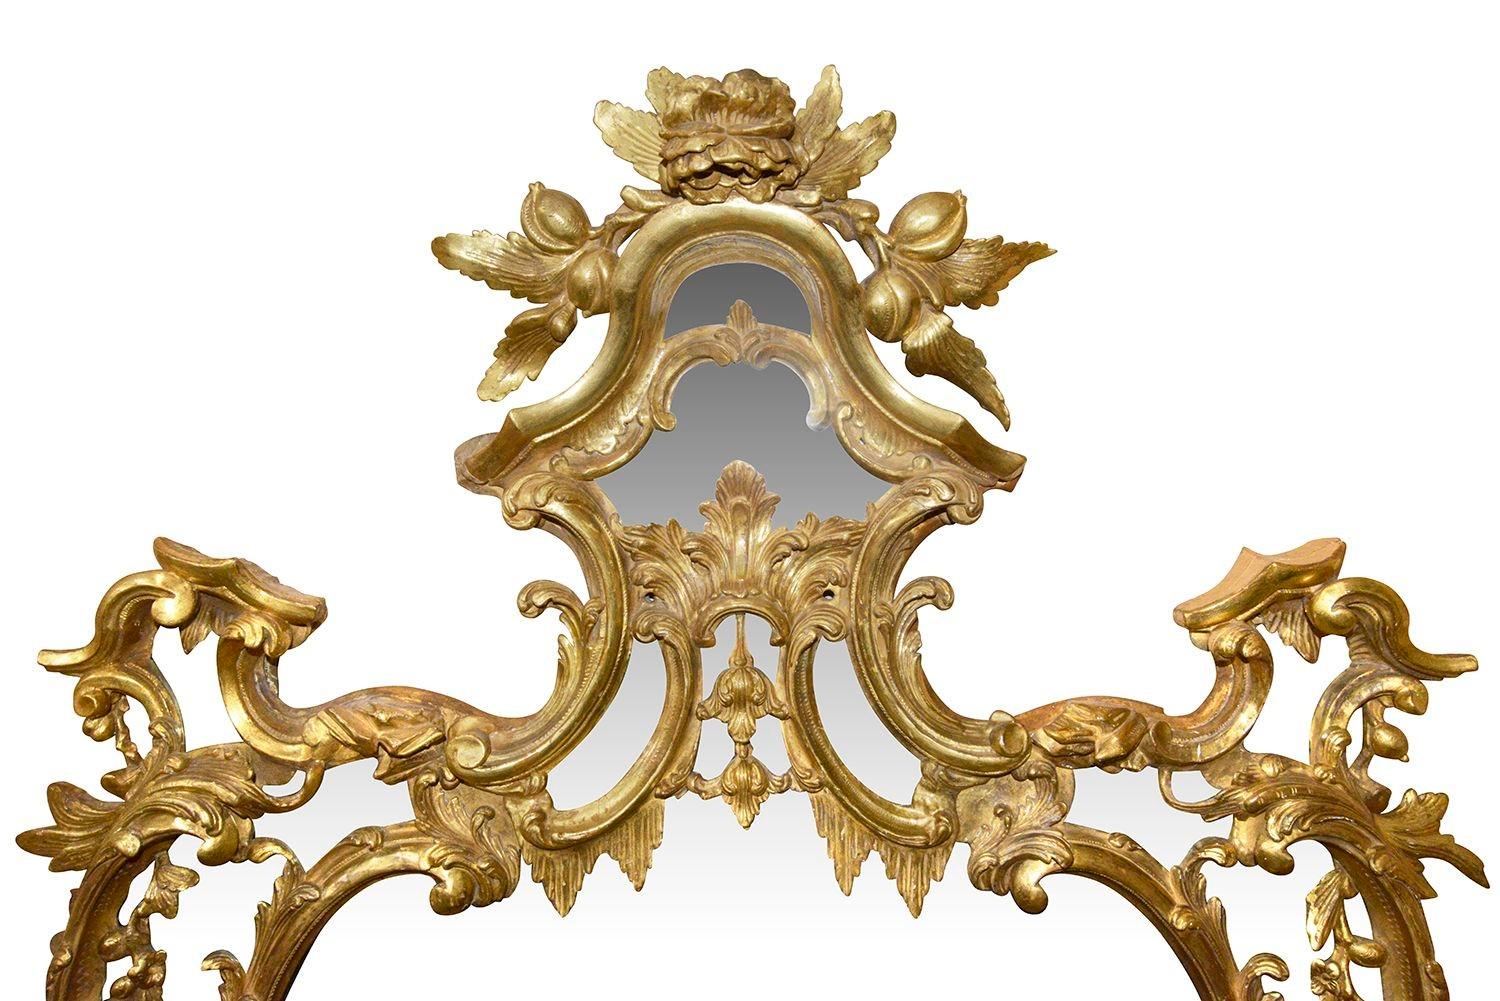 A very impressive fine quality 19th Carved gilt wood Chippendale style Pier glass / over mantle wall mirror. 
Having wonderful carved scrolling foliate, floral and fruit decoration.
 
Batch 74. 62286. DSNYKZ